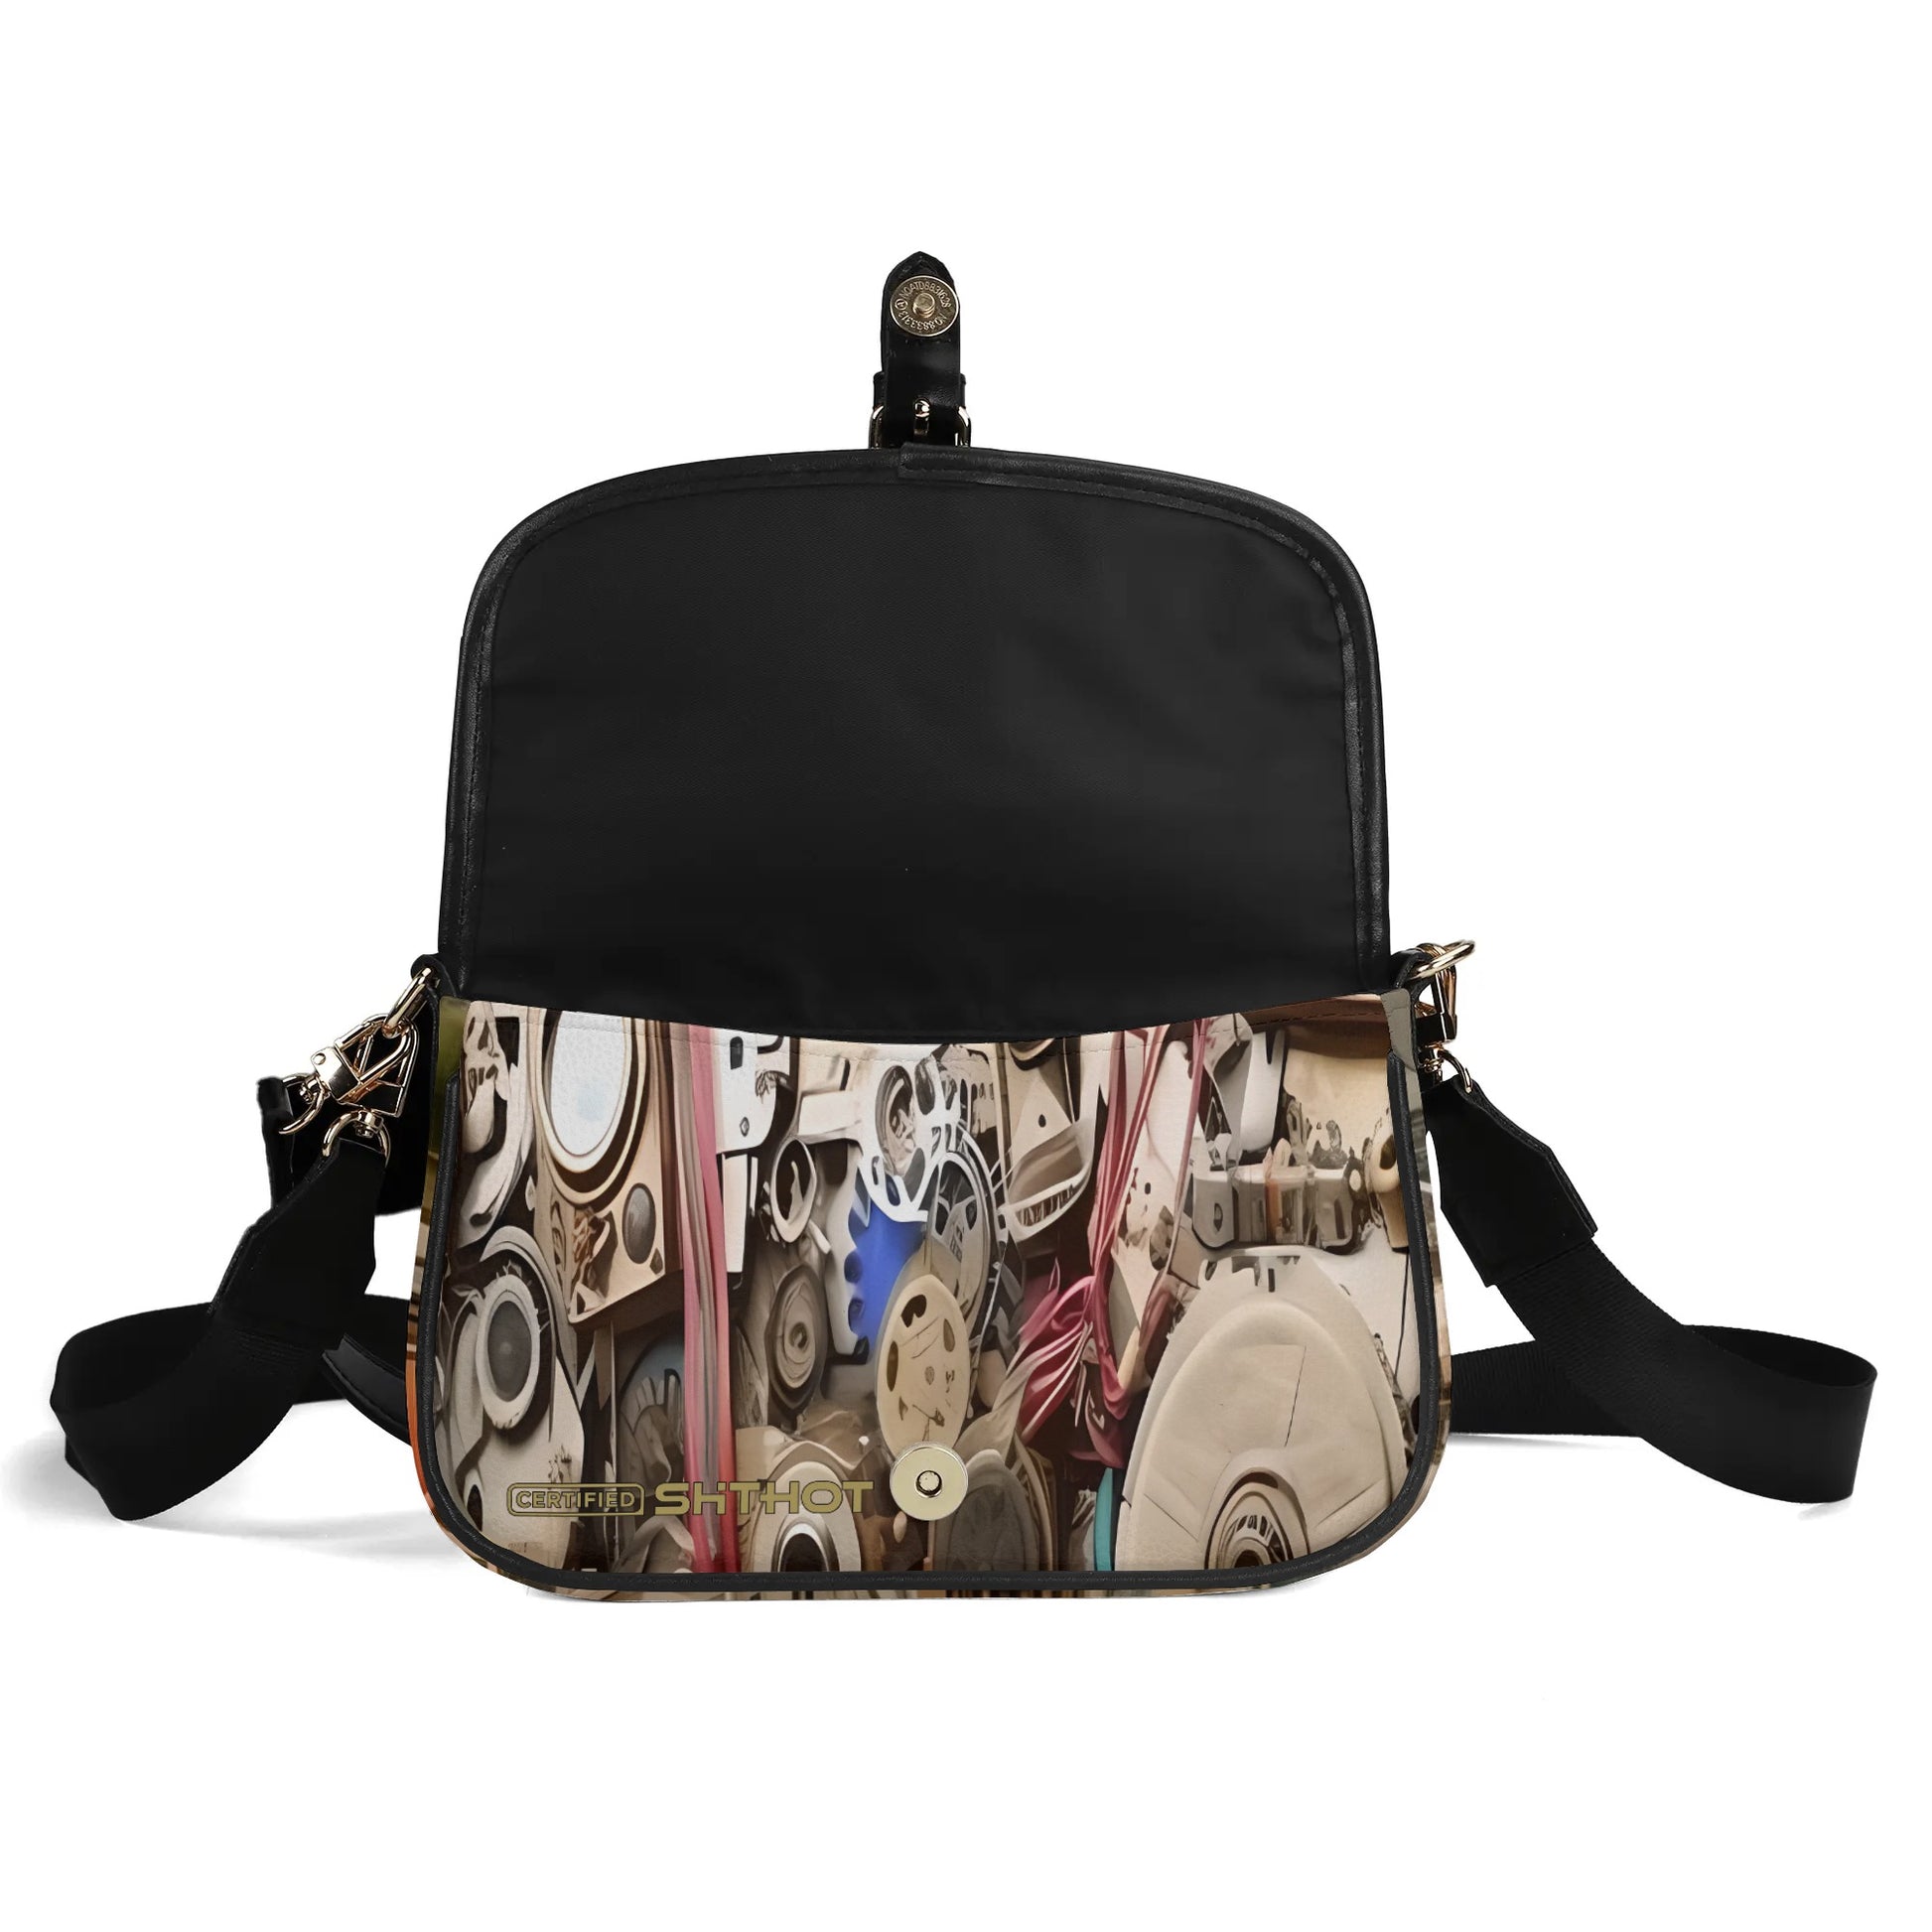 Womens Certified ShitHot Steampunk "The Speaker" Shoulder Bag